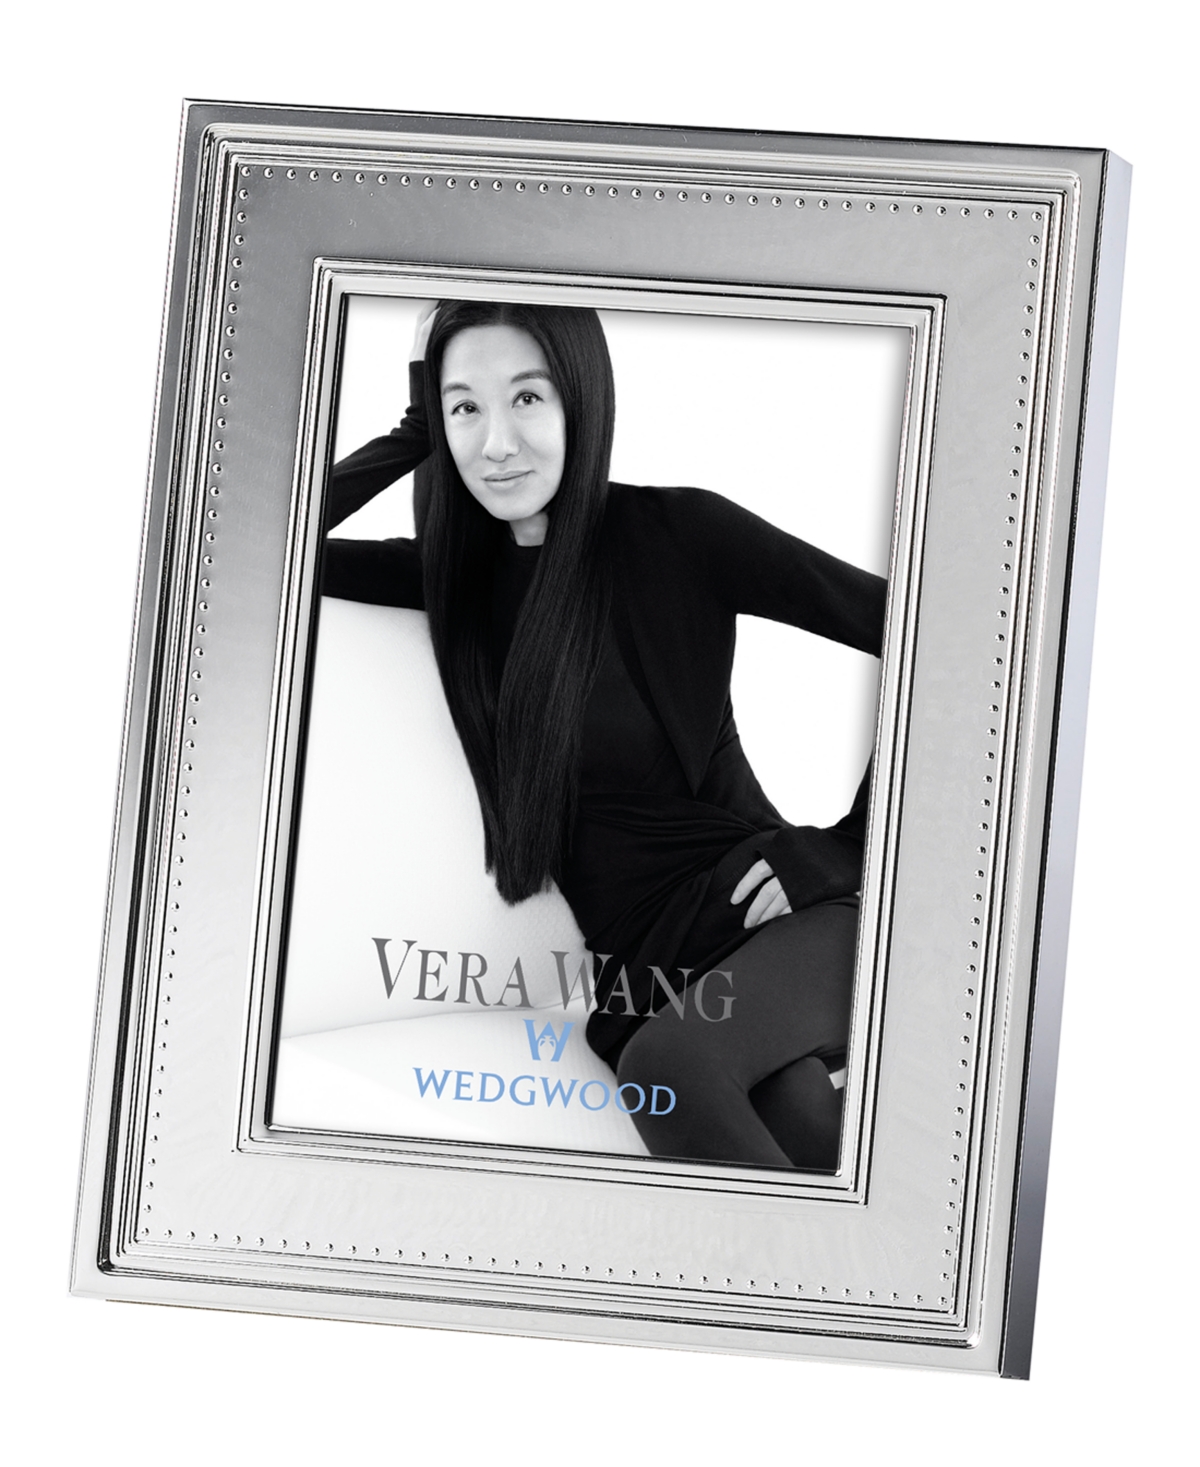 Vera Wang Wedgwood Grosgrain Gifts Collection & Reviews - Macy's